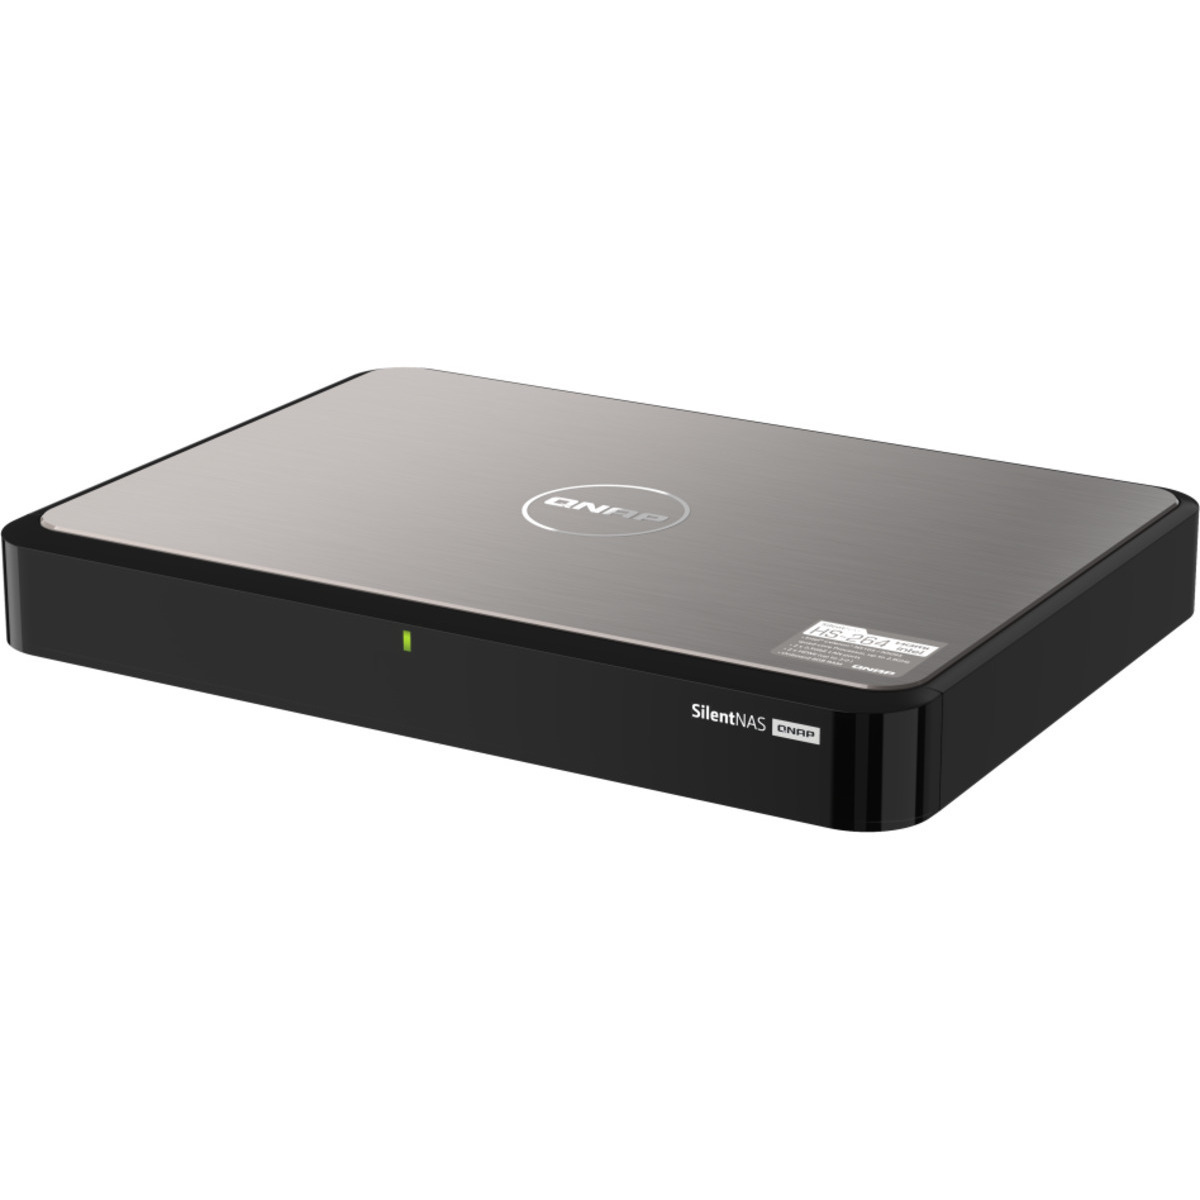 QNAP HS-264 2tb 2-Bay Desktop Multimedia / Power User / Business NAS - Network Attached Storage Device 2x1tb Crucial MX500 CT1000MX500SSD1 2.5 560/510MB/s SATA 6Gb/s SSD CONSUMER Class Drives Installed - Burn-In Tested HS-264